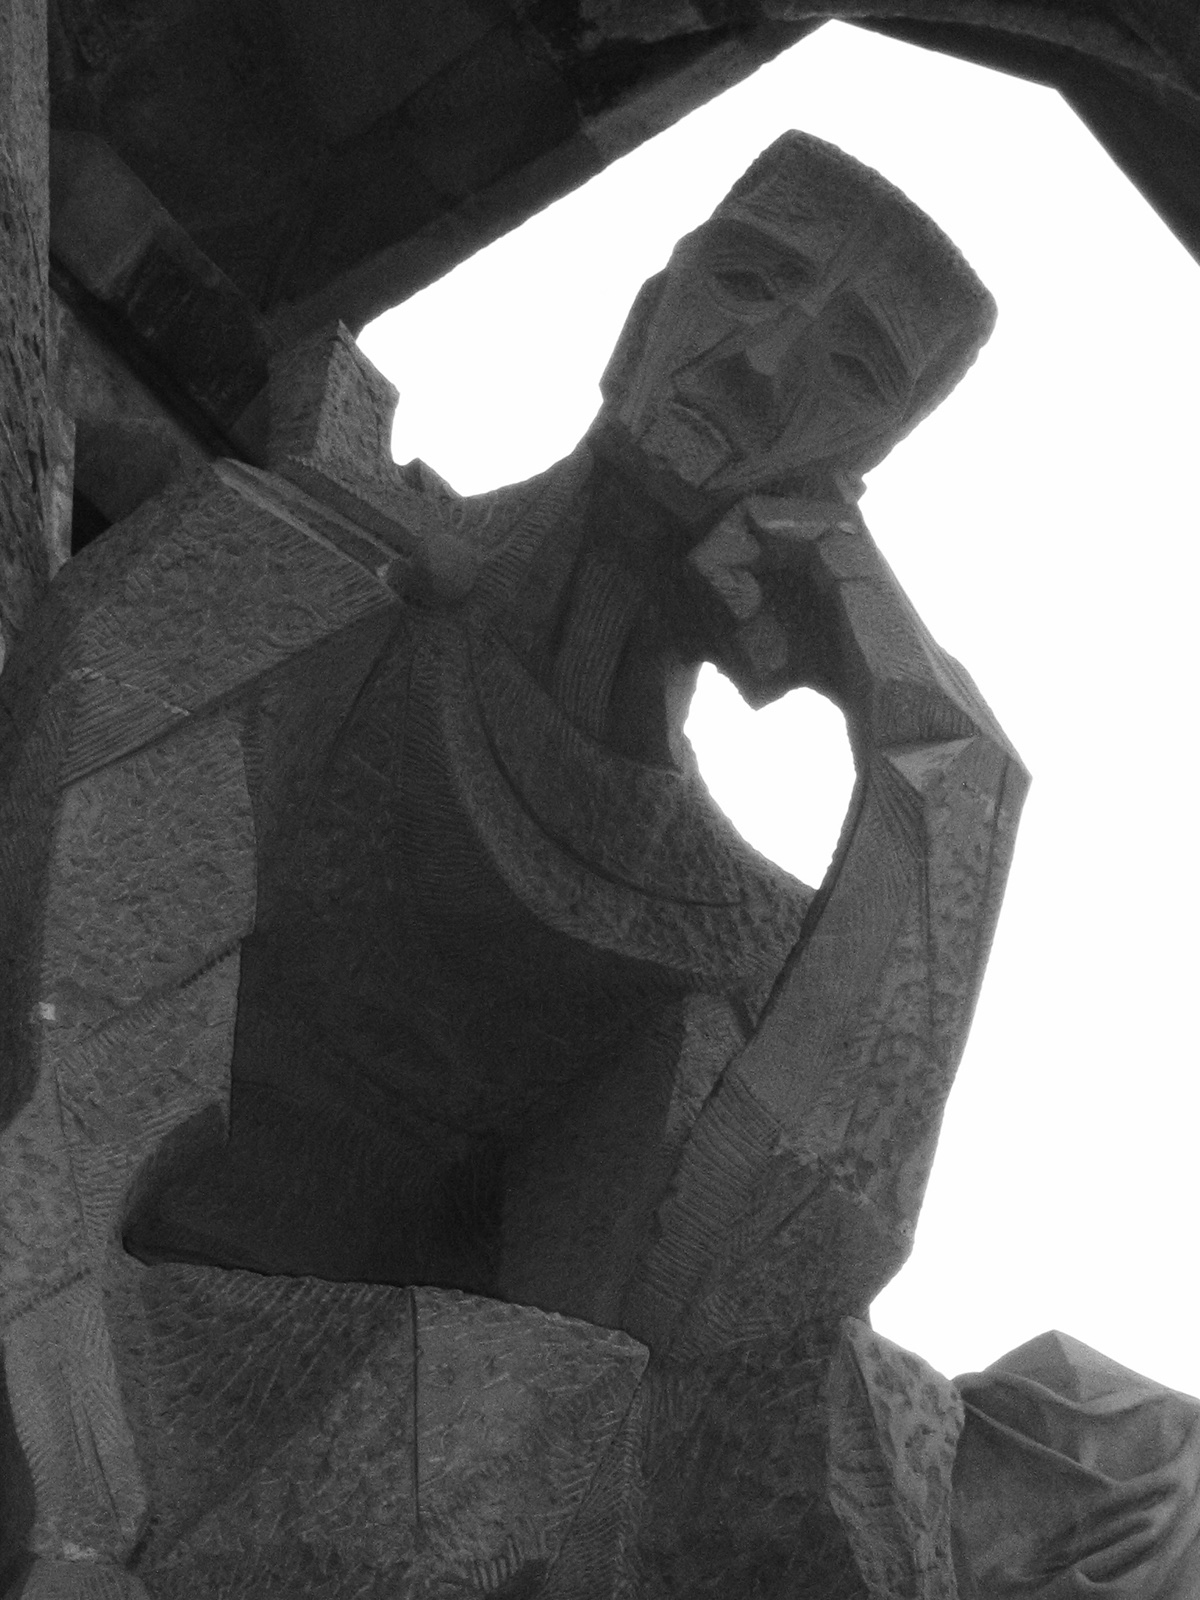 Photography  statues Travel prague sculpture black and white